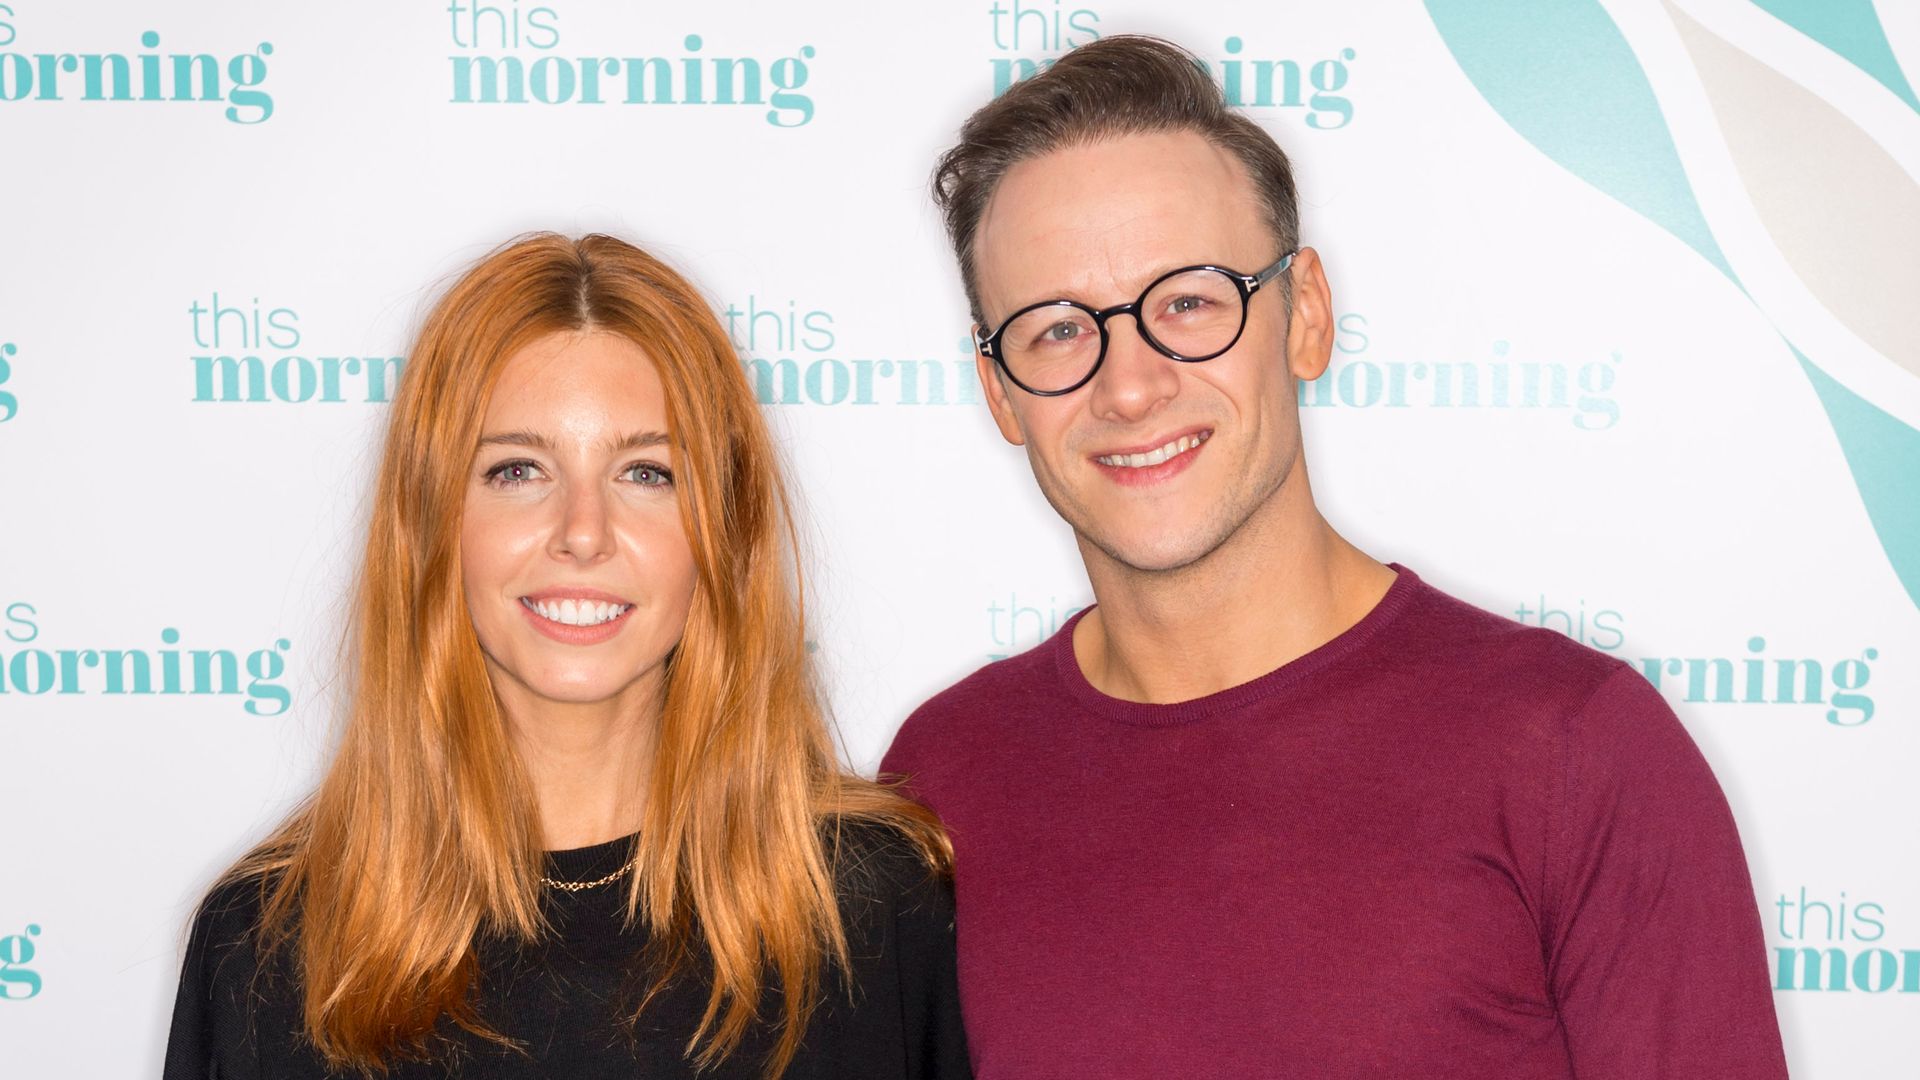 Stacey Dooley standing with Kevin Clifton